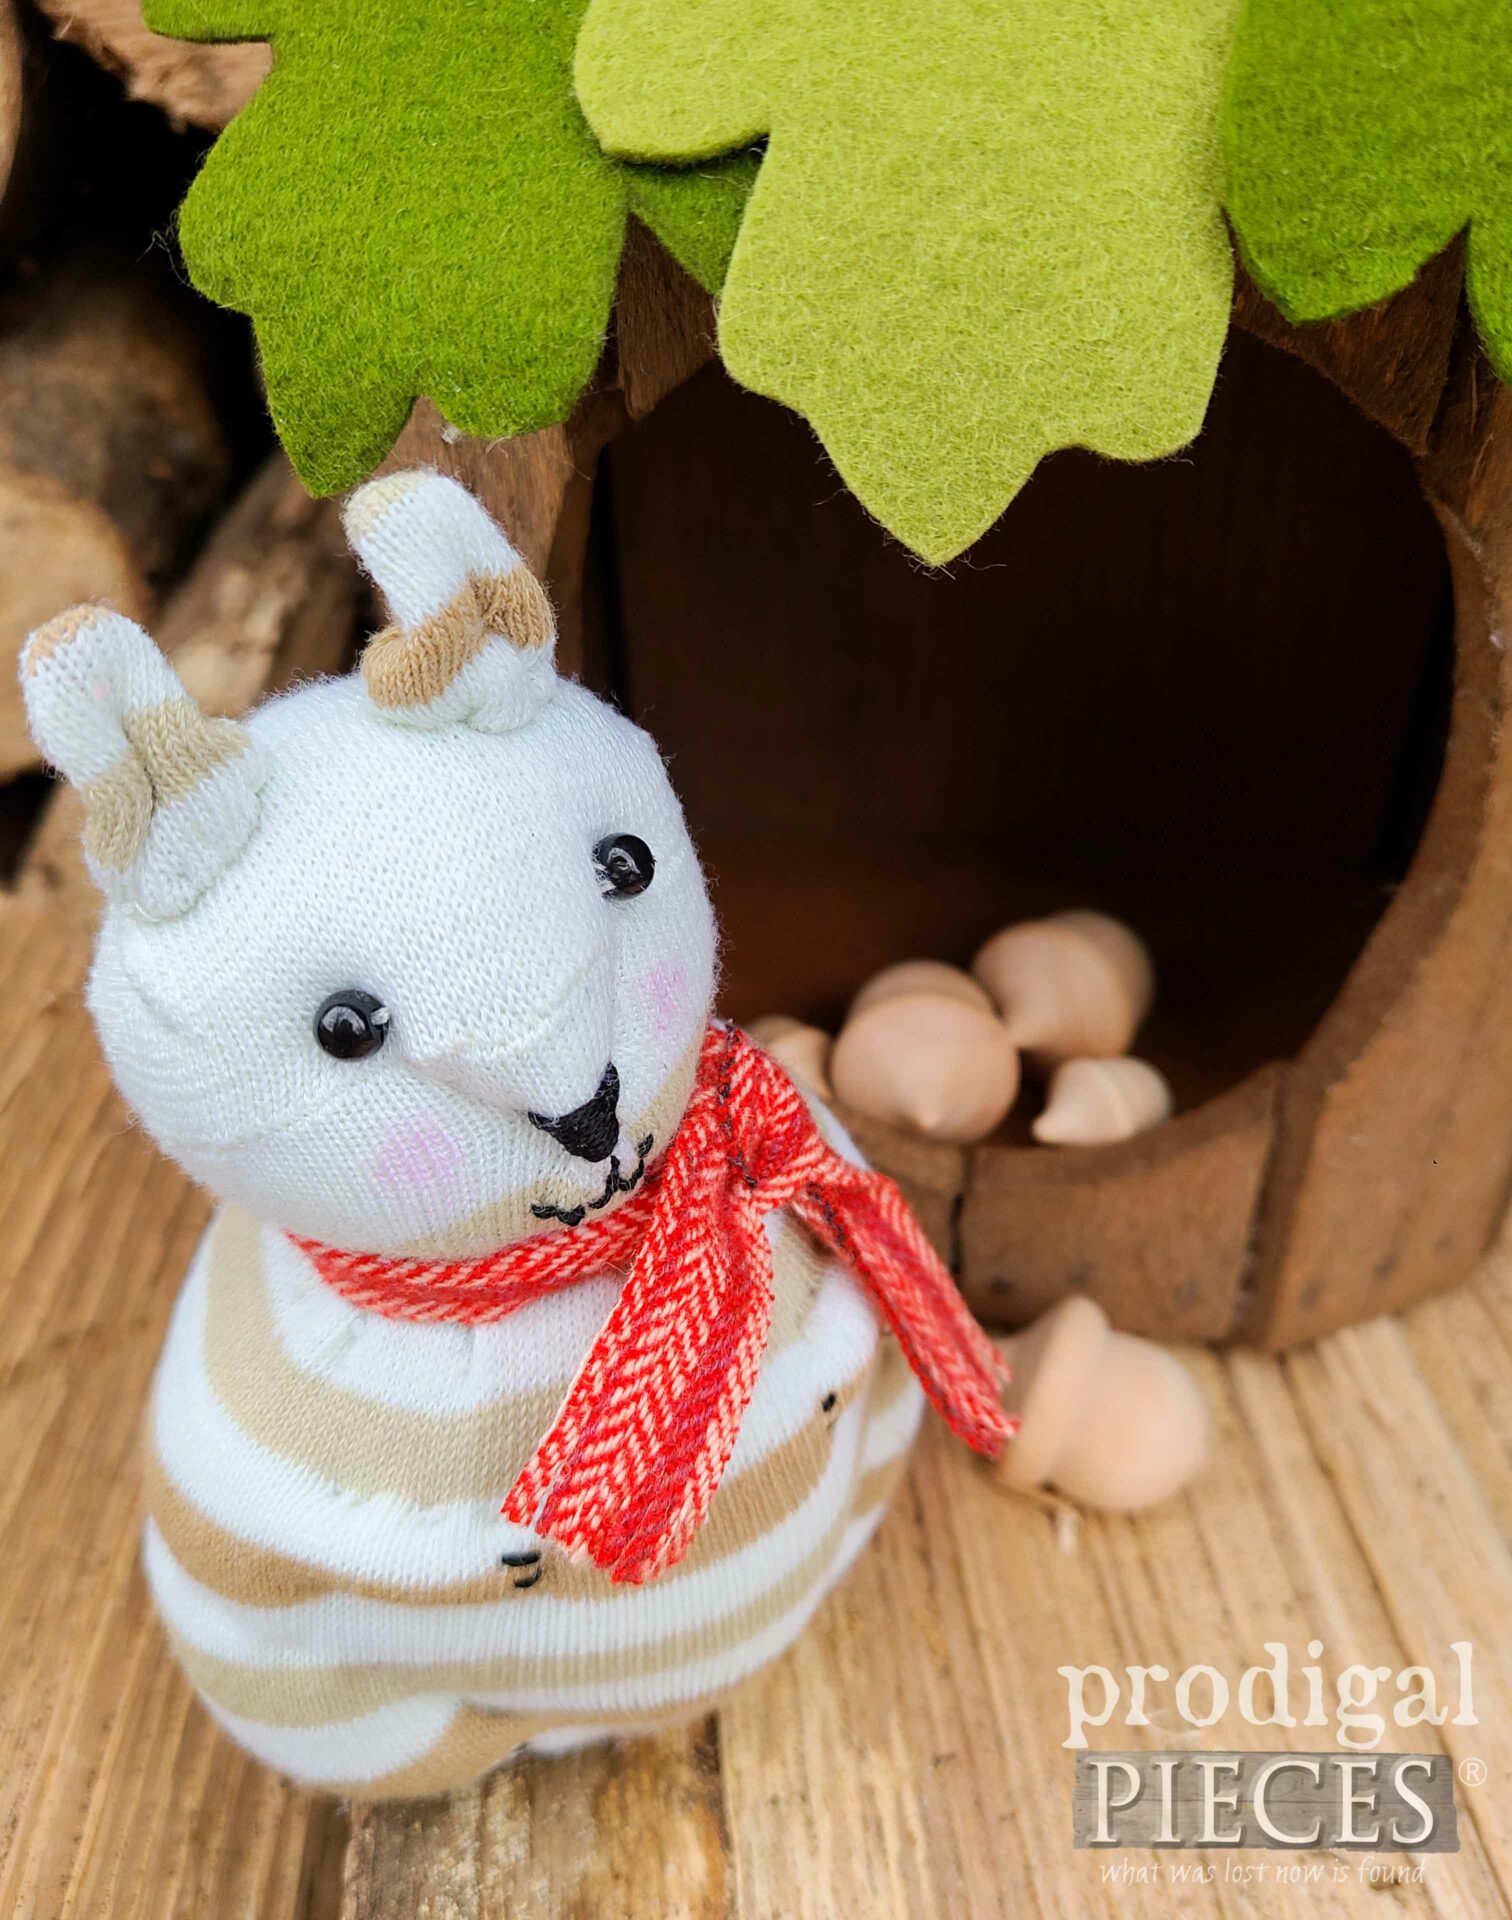 Chubby Cute Handmade Sock Doll Squirrel for Thrifted Planter Upcycle by Larissa of Prodigal Pieces | prodigalpieces.com #prodigalpieces #handmade #dolls #toys #kids